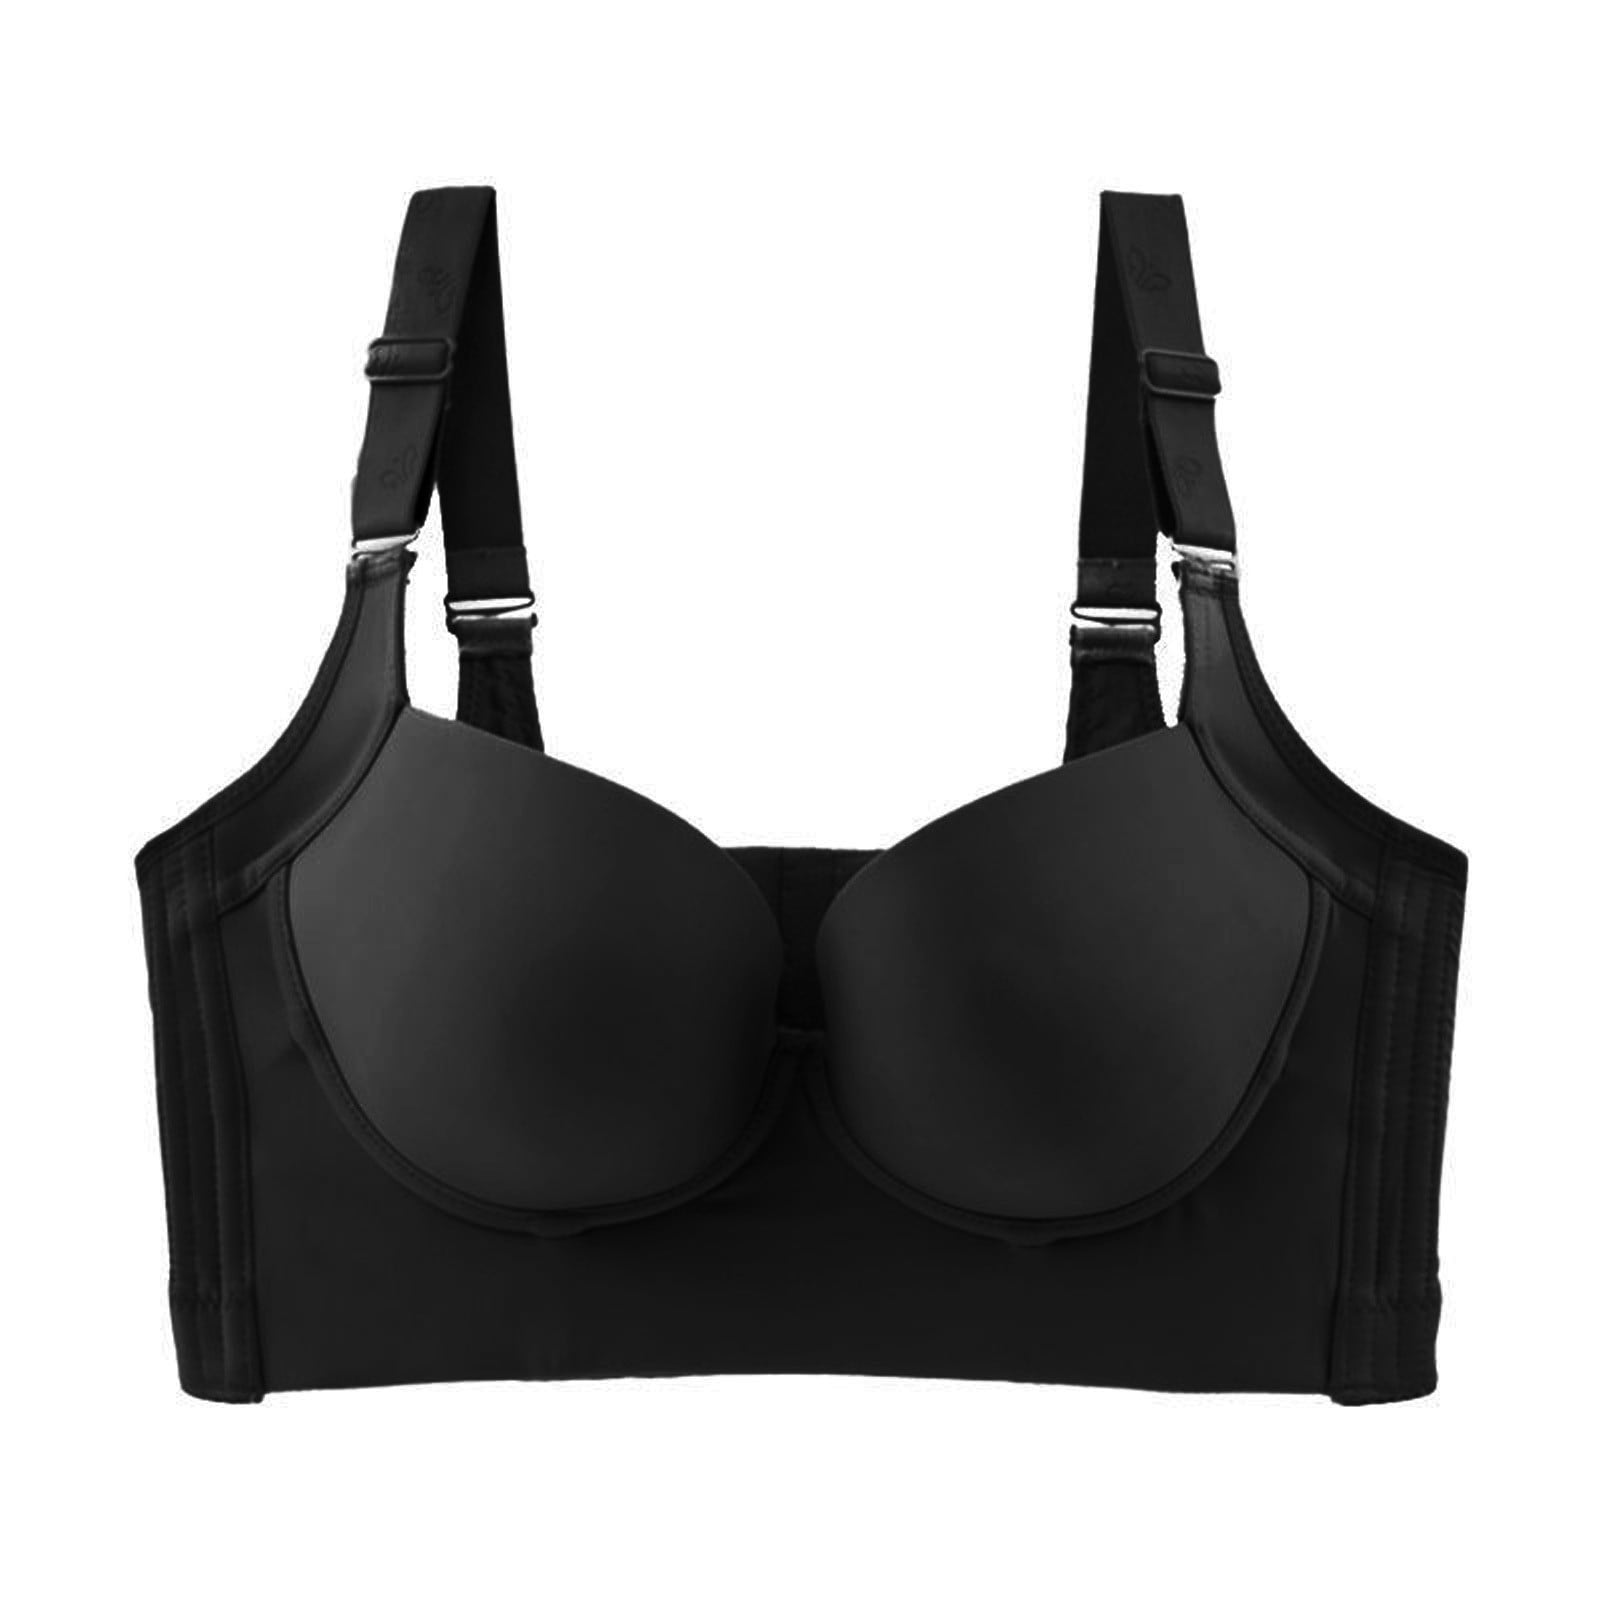 AILIVIN Bras for women full coverage Wireless womens bras full size support  minimizer not back fat wide straps wirefree unpadded lift up comfy Plus